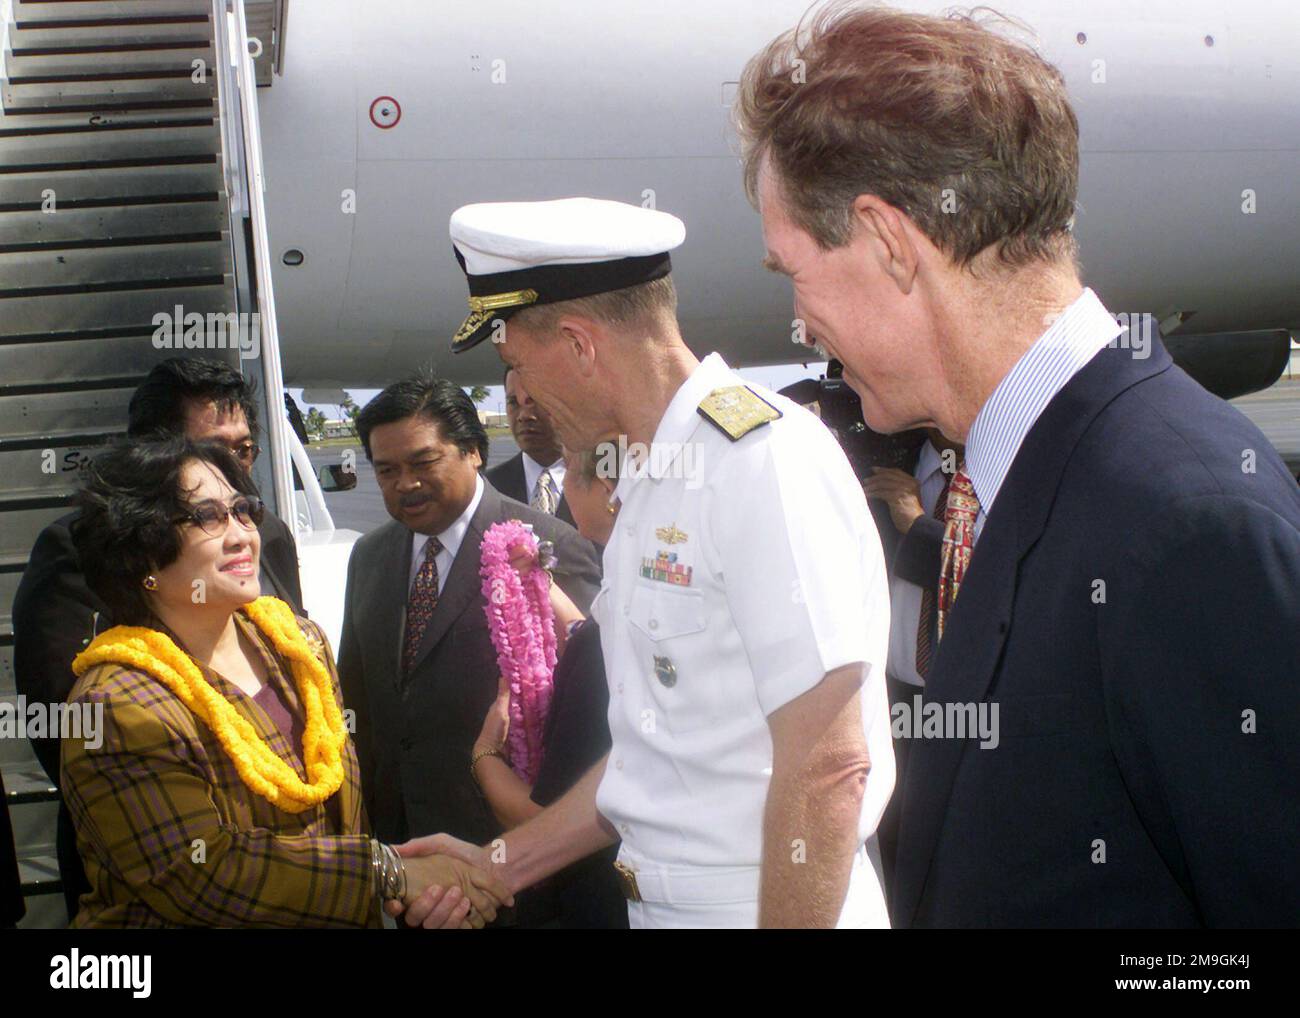 President of Indonesia, Megawati Sukarnoputri, greeted by Admiral Dennis C. Blair, US Pacific Commander in CHIEF, at her arrival at Hickam Air Force Base, Hawaii. President Megawati stopped at Hickam to refuel her aircraft. She is enroute to New York to address the UN General Assembly. Base: Hickam Air Force Base State: Hawaii (HI) Country: United States Of America (USA) Scene Major Command Shown: PACAF Stock Photo